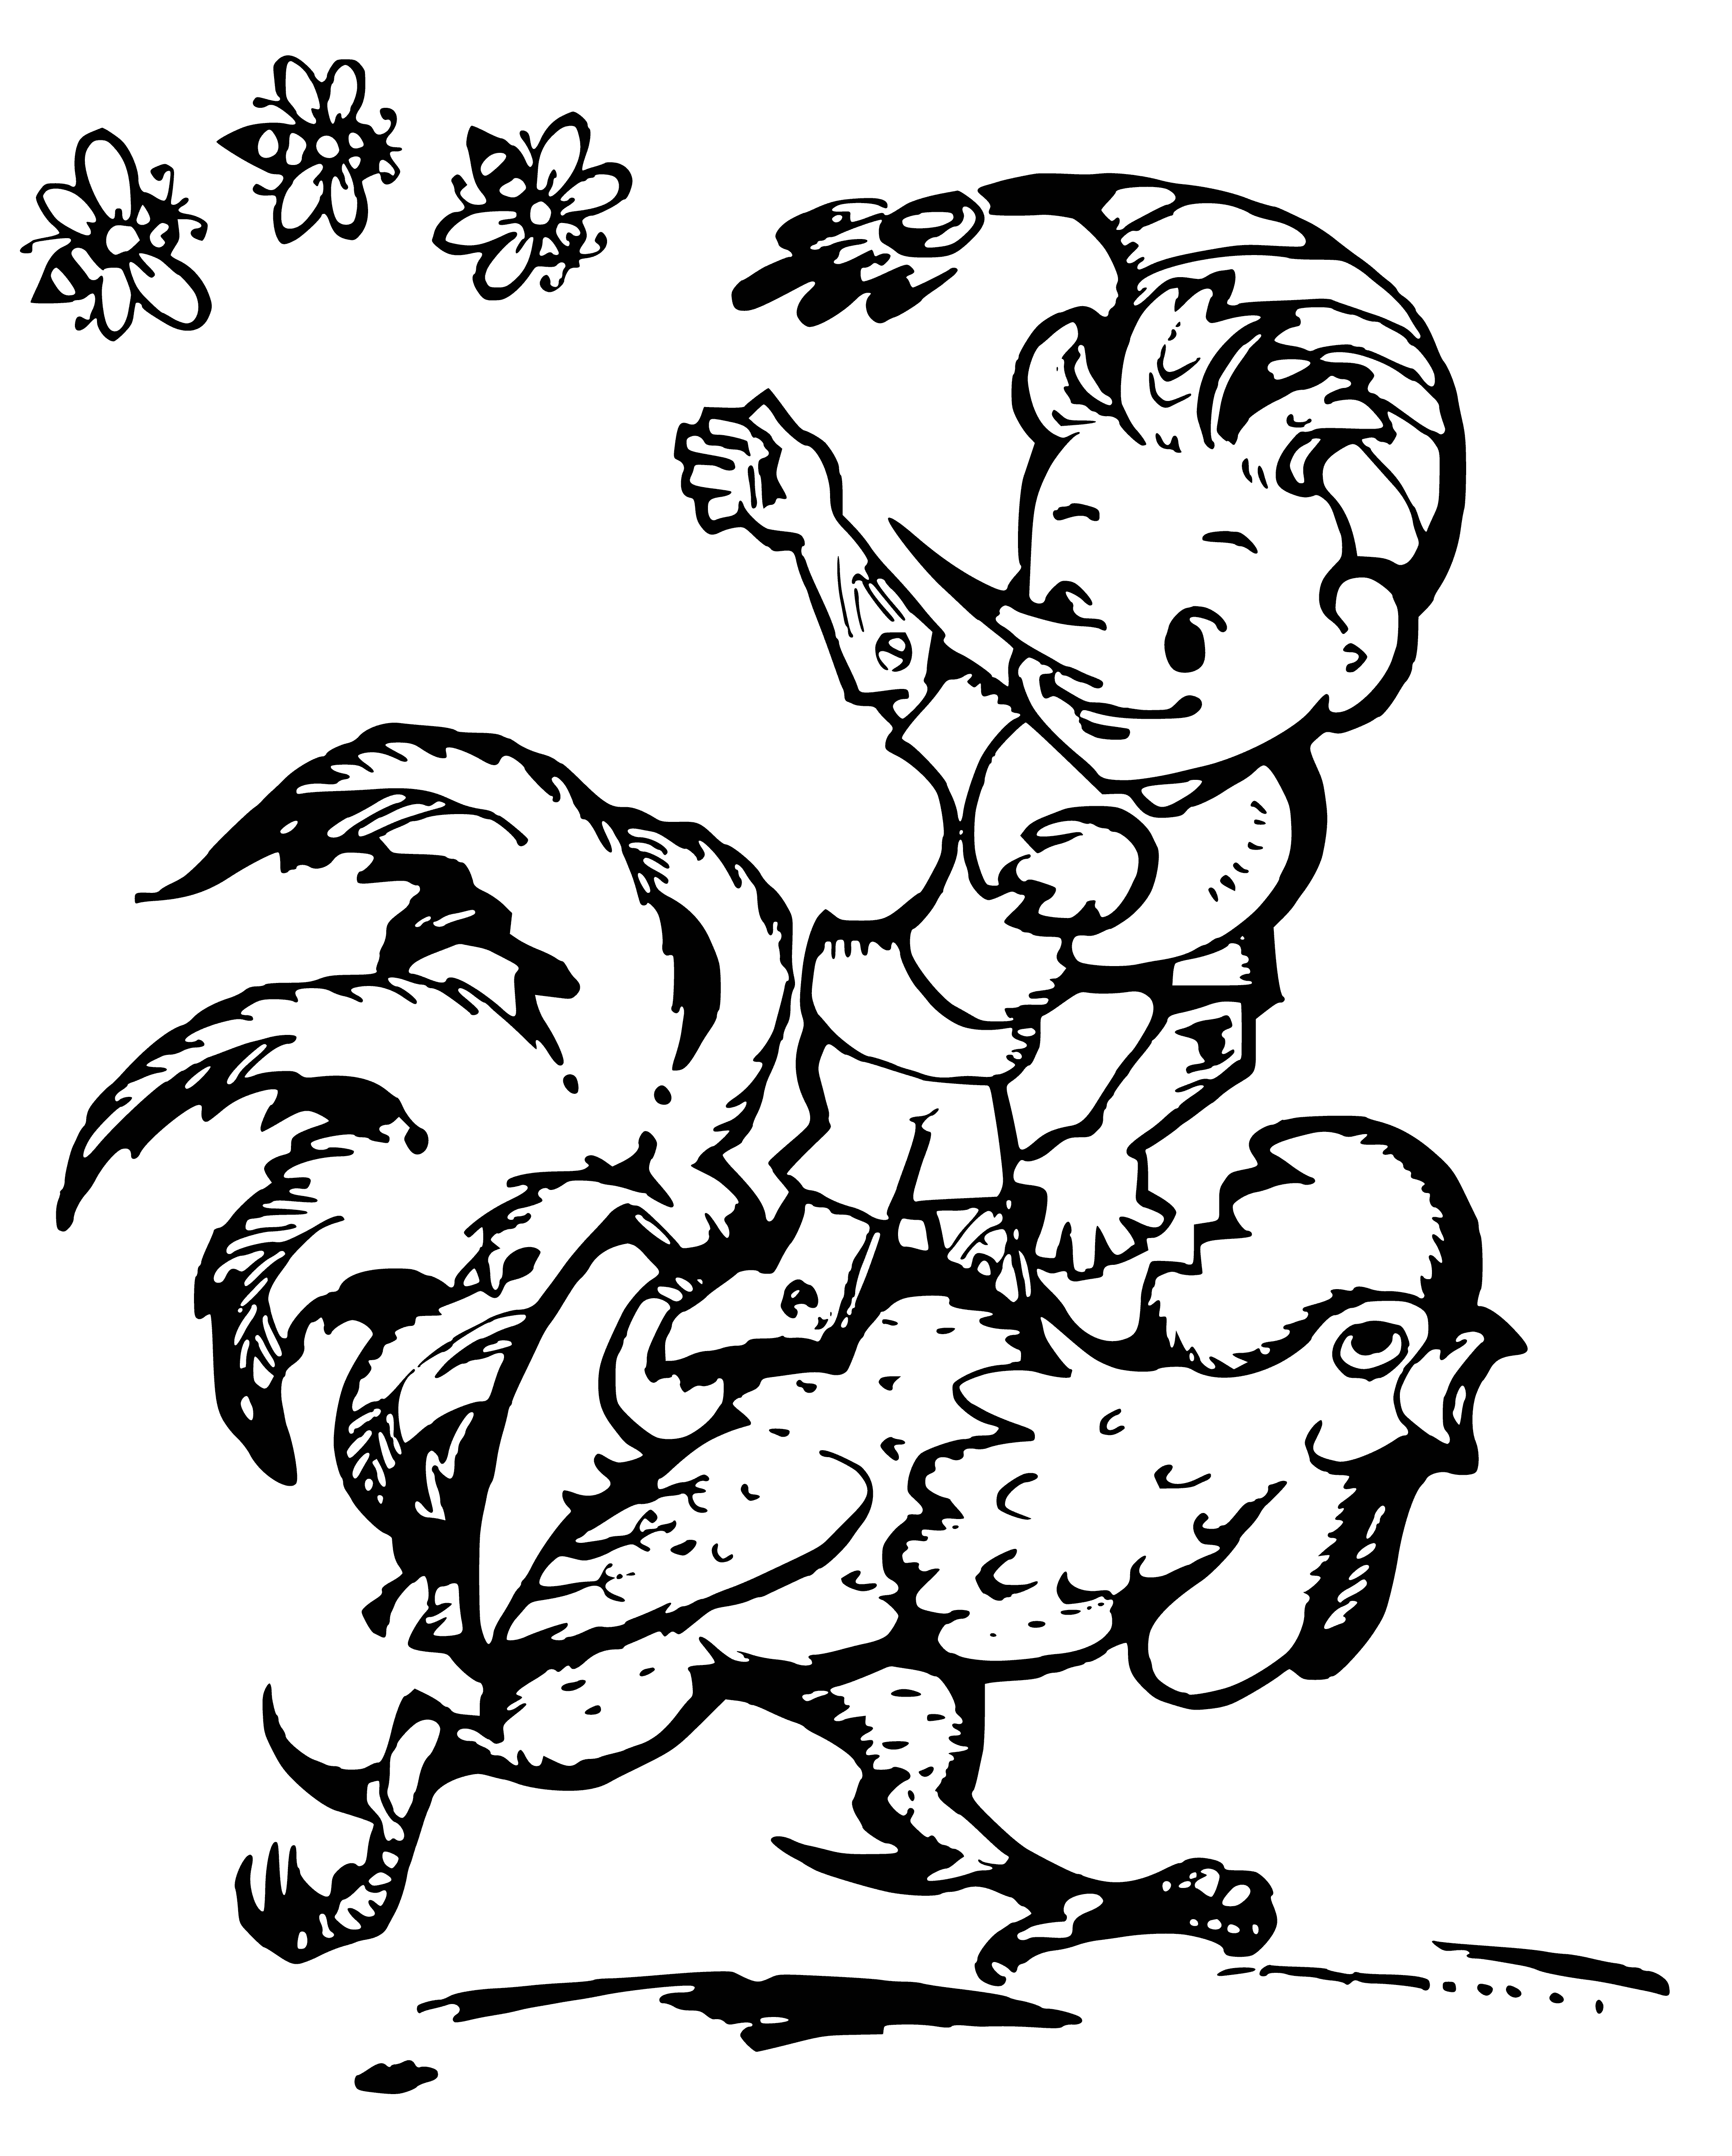 coloring page: Pinocchio riding a yellow, feathered cock, flying over a green landscape with trees, river, and castle. Face determined.